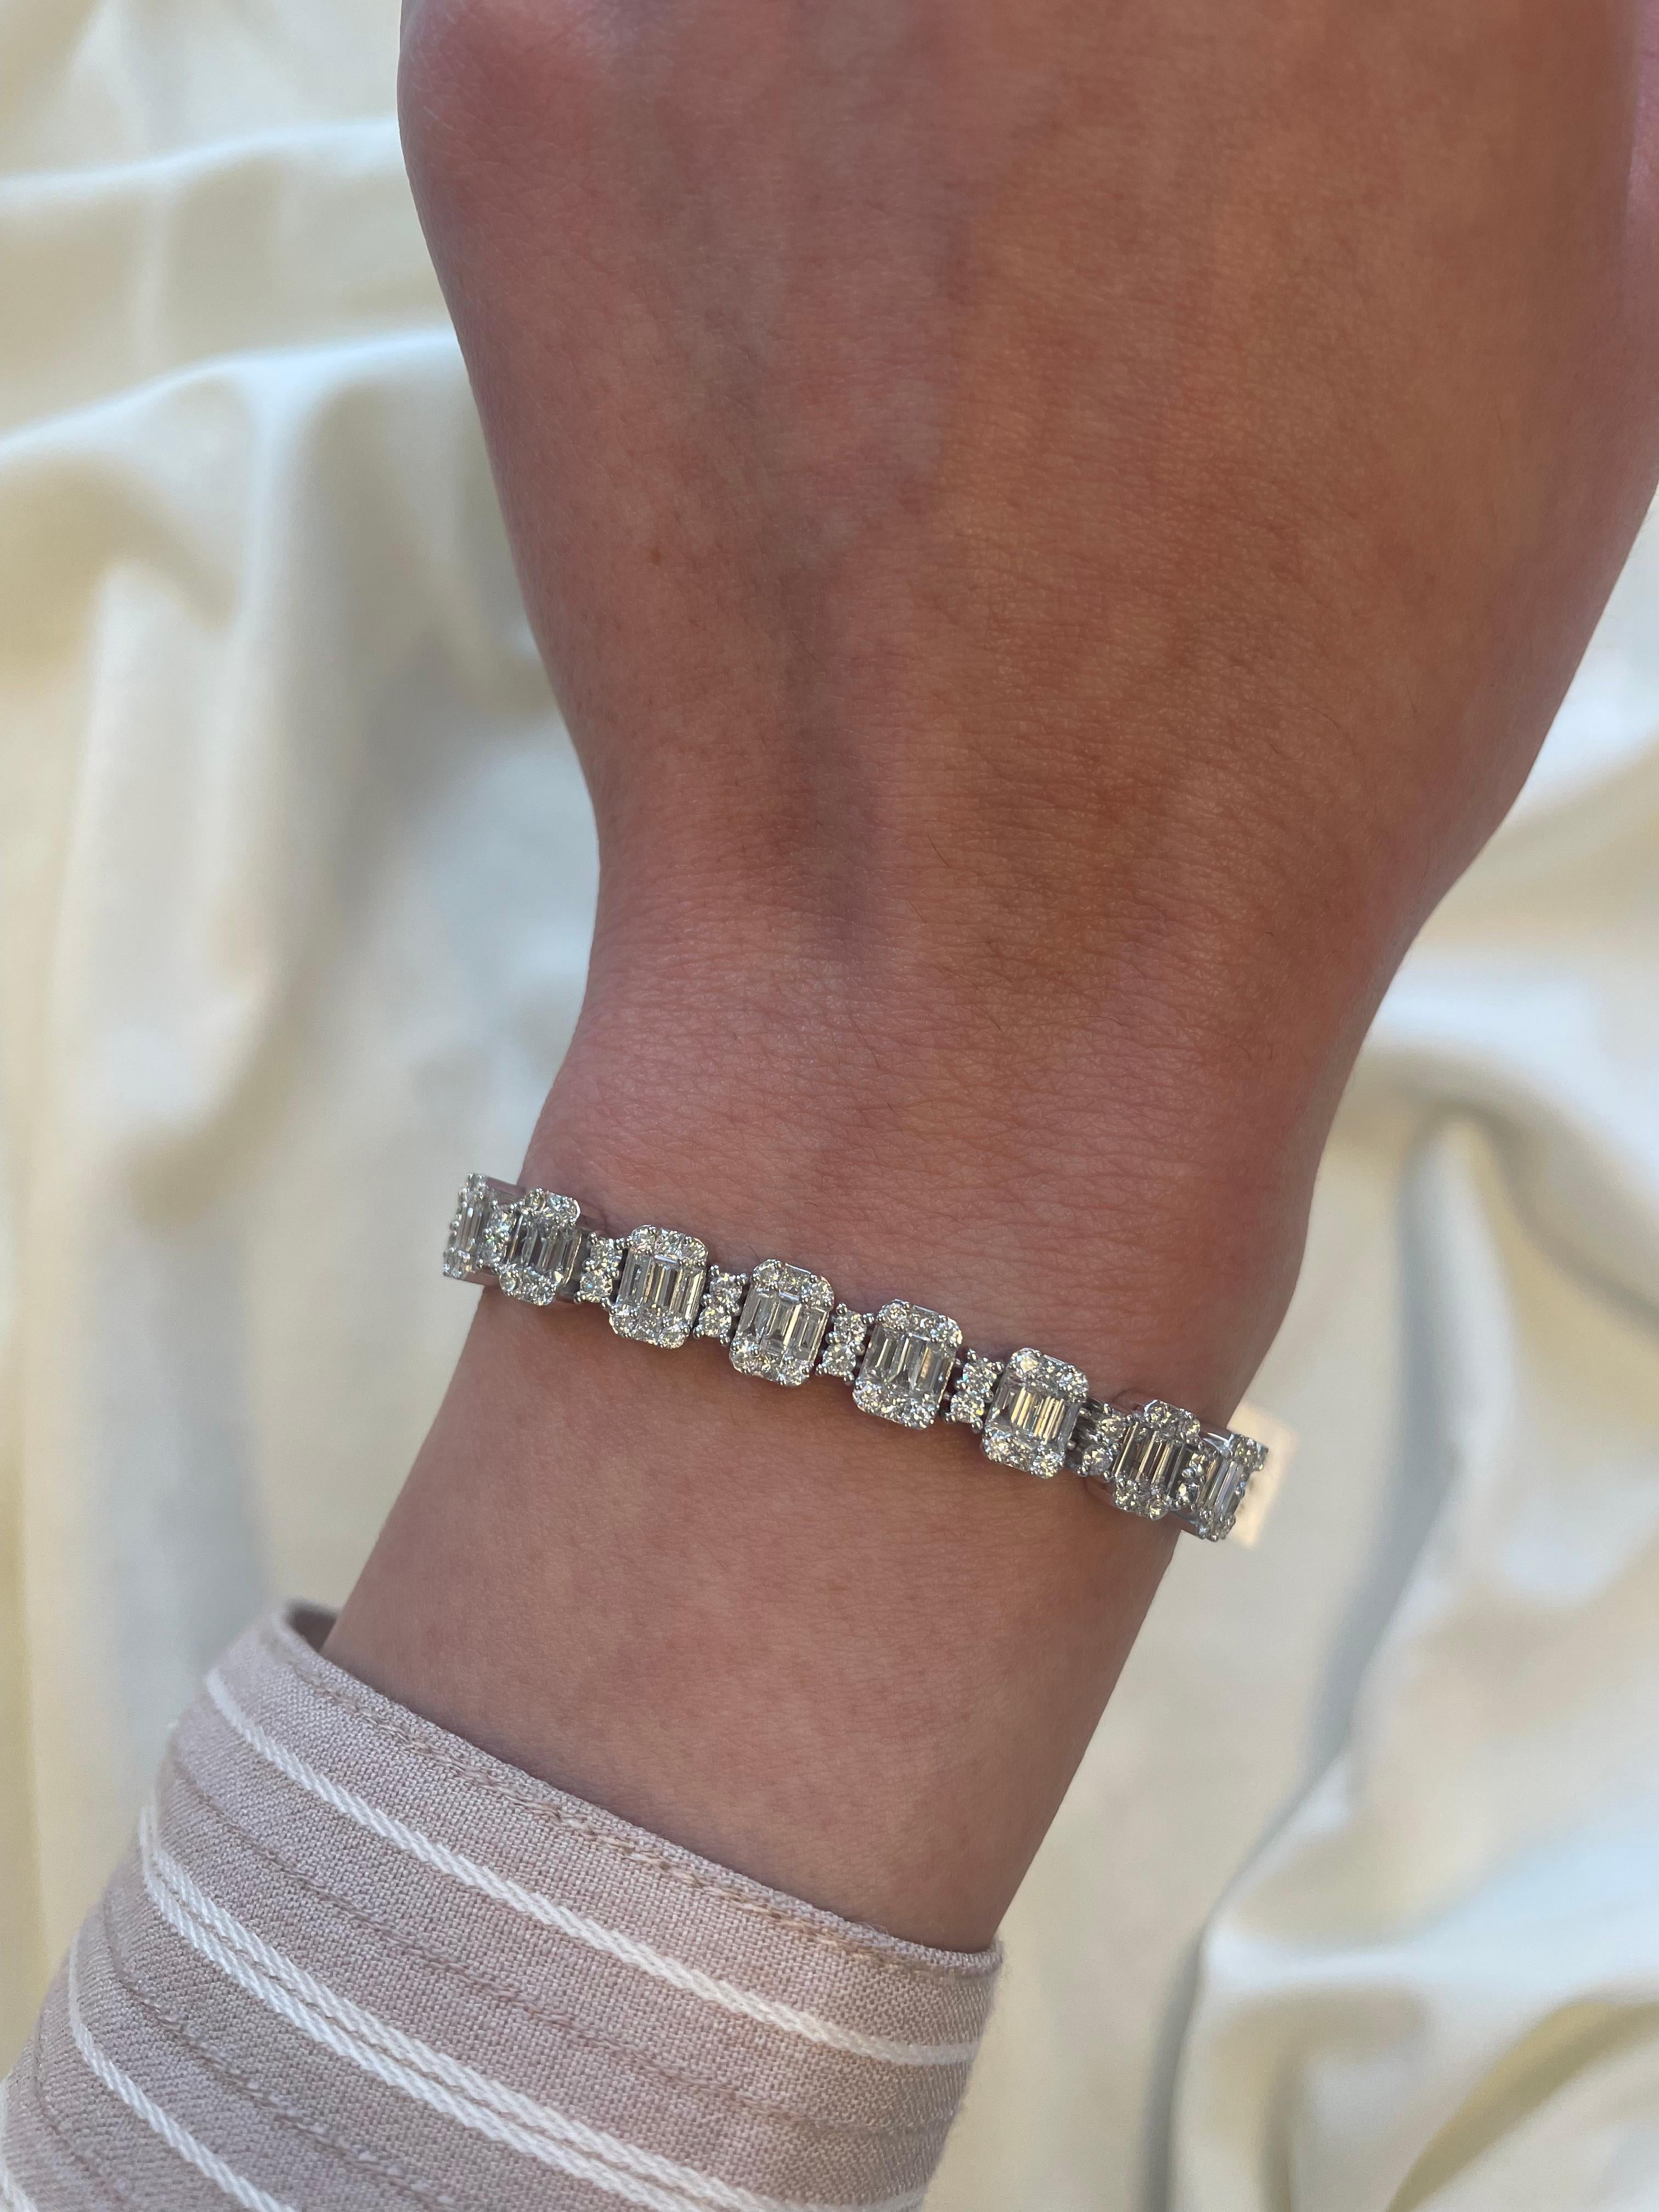 Sensational illusion set diamond bracelet with the look of emerald cut diamonds. High jewelry by Alexander Beverly Hills.
253 round, baguette, and princess cut diamonds, 7.93 carats. Approximately G/H color and VS2/SI1 clarity. 18k white gold, 23.03